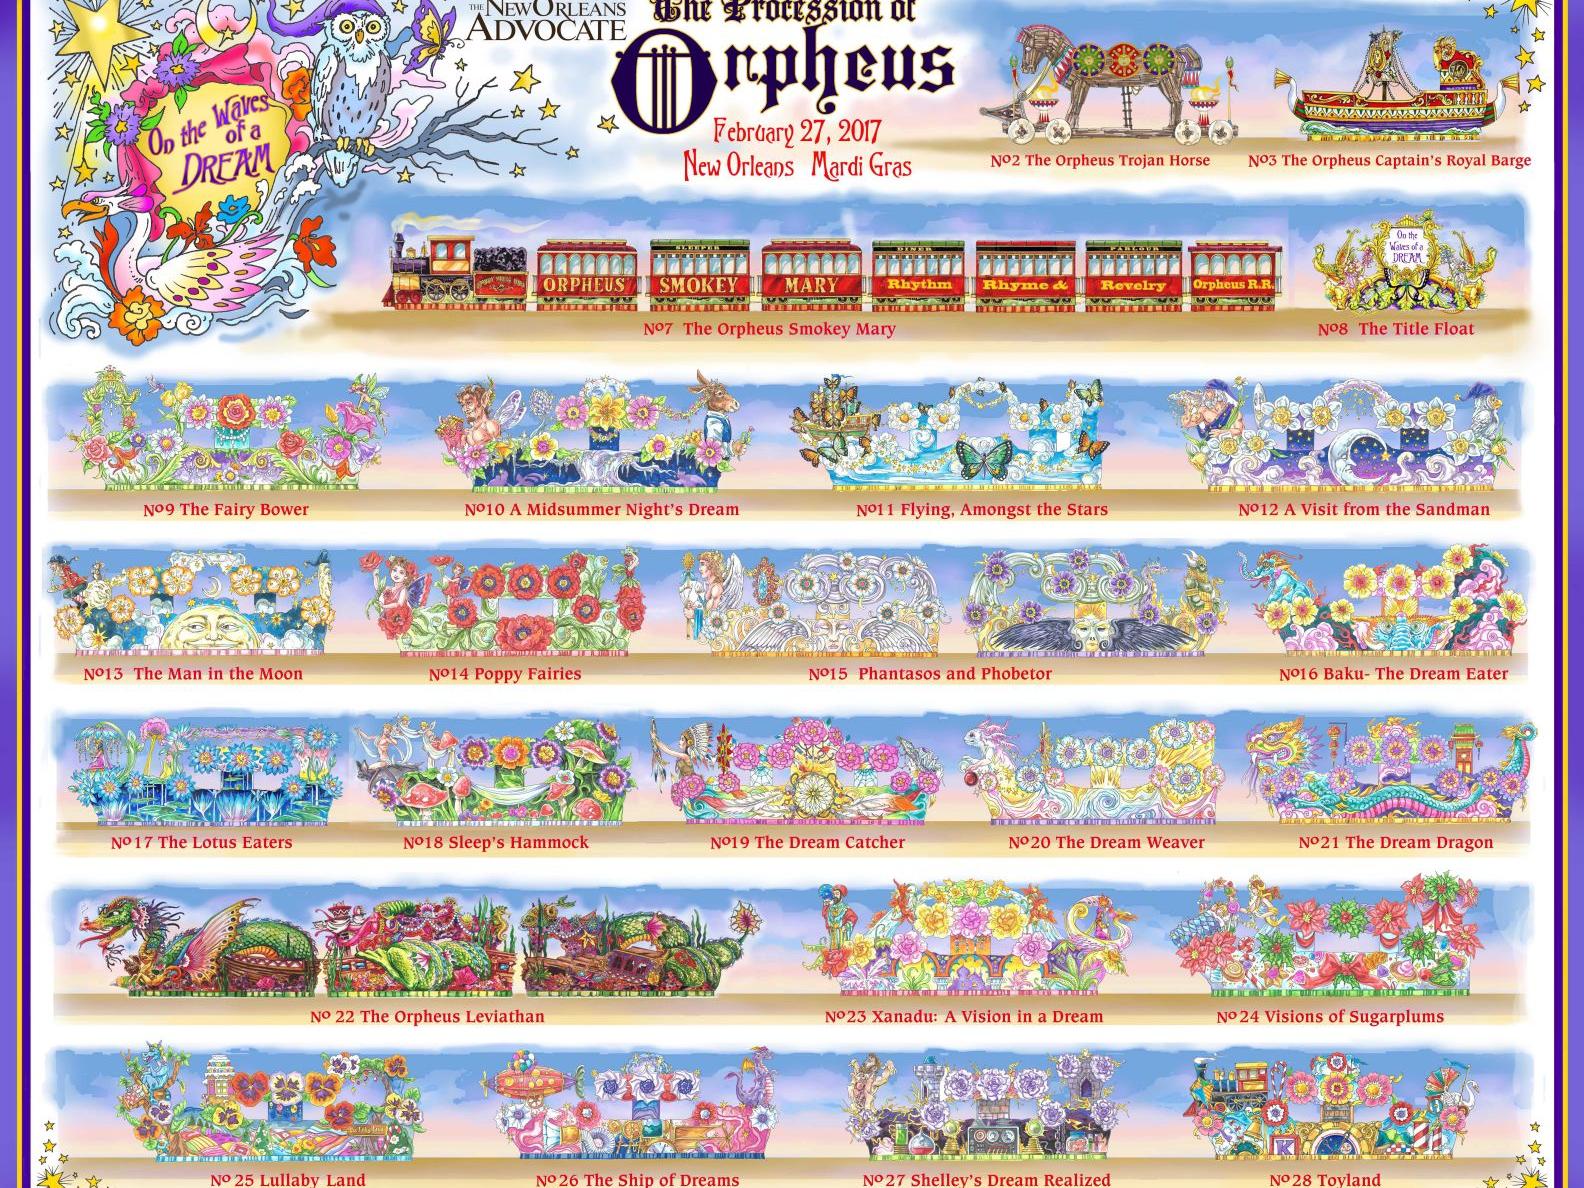 Procession Of Orpheus 2017 Sneak Peek At Parade Floats You Ll See On Lundi Gras Theadvocate Com